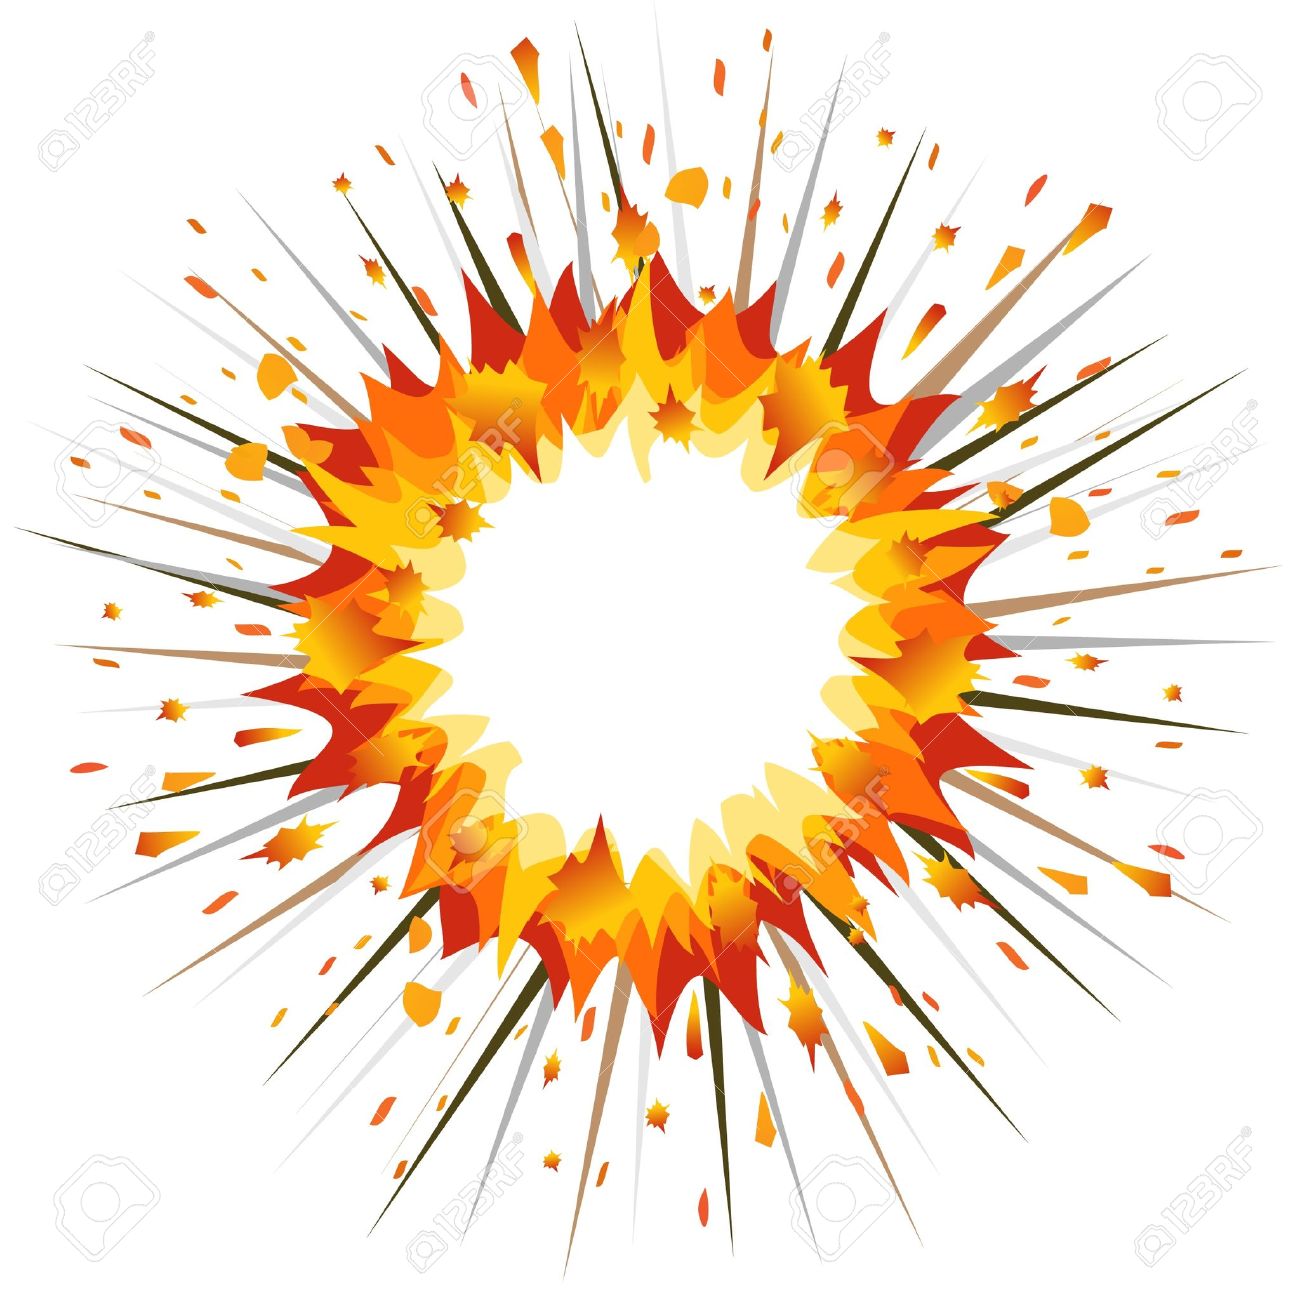 clipart of explosion - photo #9